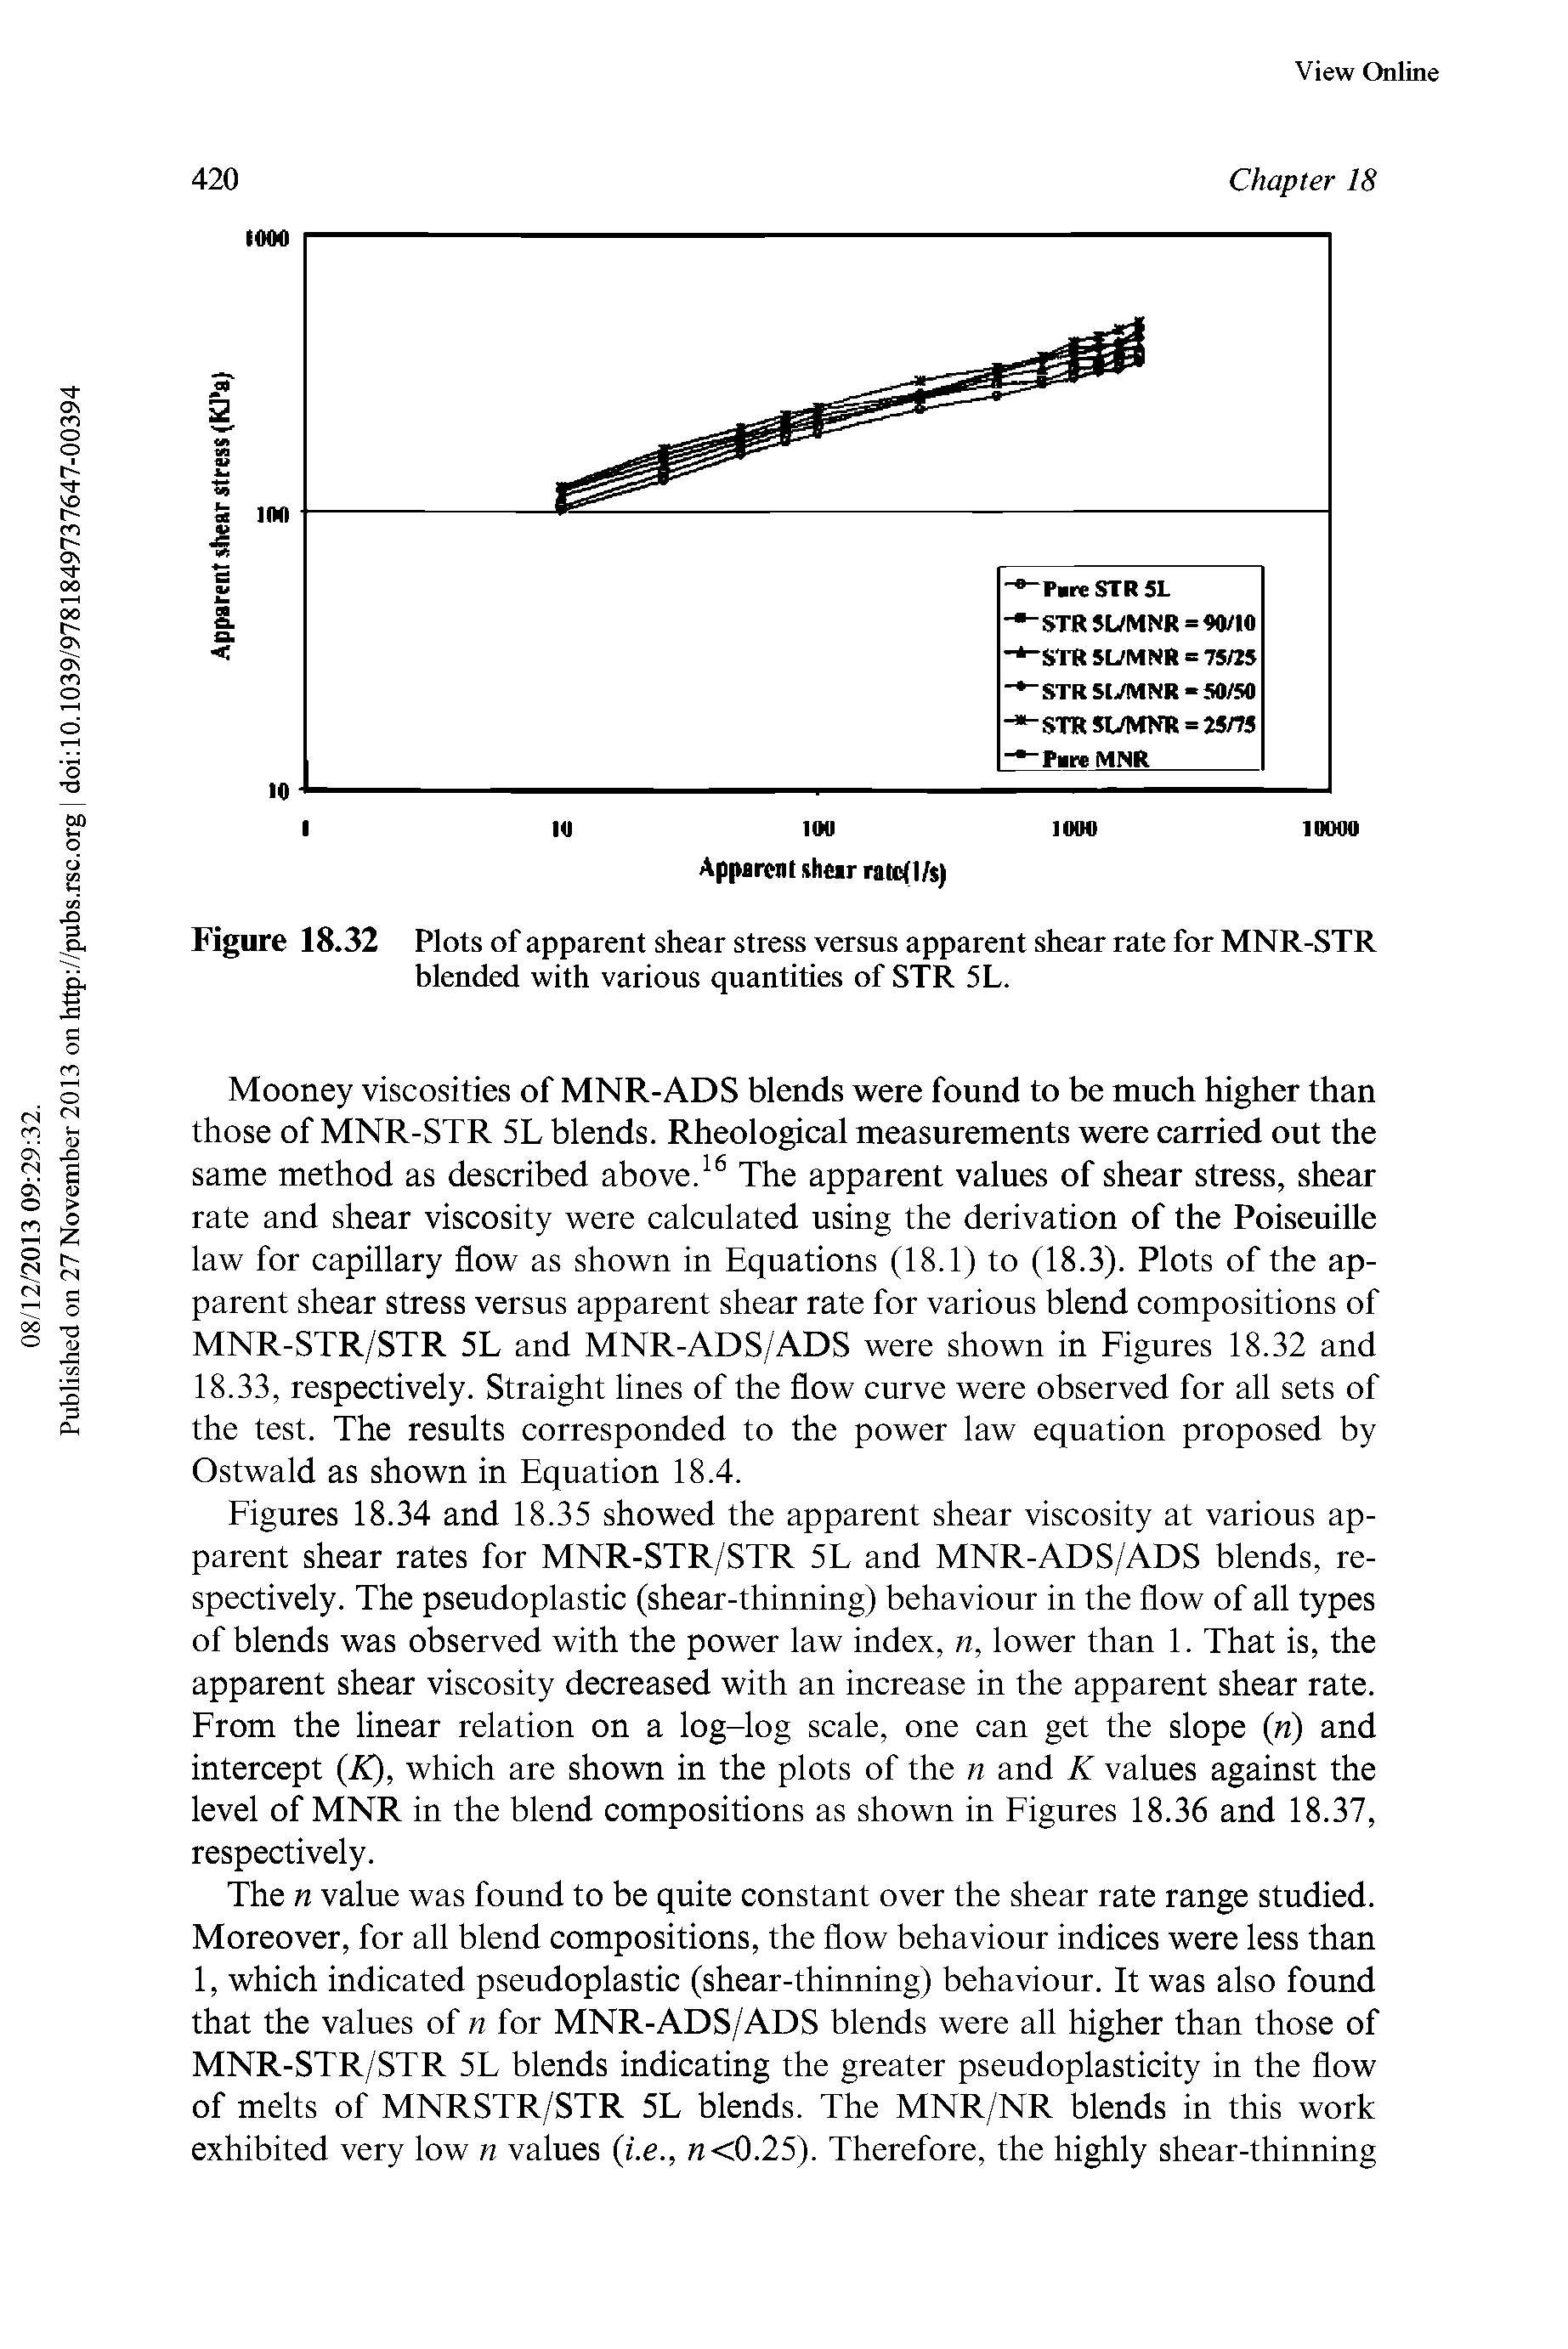 Figures 18.34 and 18.35 showed the apparent shear viscosity at various apparent shear rates for MNR-STR/STR 5L and MNR-ADS/ADS blends, respectively. The pseudoplastic (shear-thinning) behaviour in the flow of all types of blends was observed with the power law index, n, lower than 1. That is, the apparent shear viscosity decreased with an increase in the apparent shear rate. From the linear relation on a log-log scale, one can get the slope (n) and intercept (K), which are shown in the plots of the n and K values against the level of MNR in the blend compositions as shown in Figures 18.36 and 18.37, respectively.